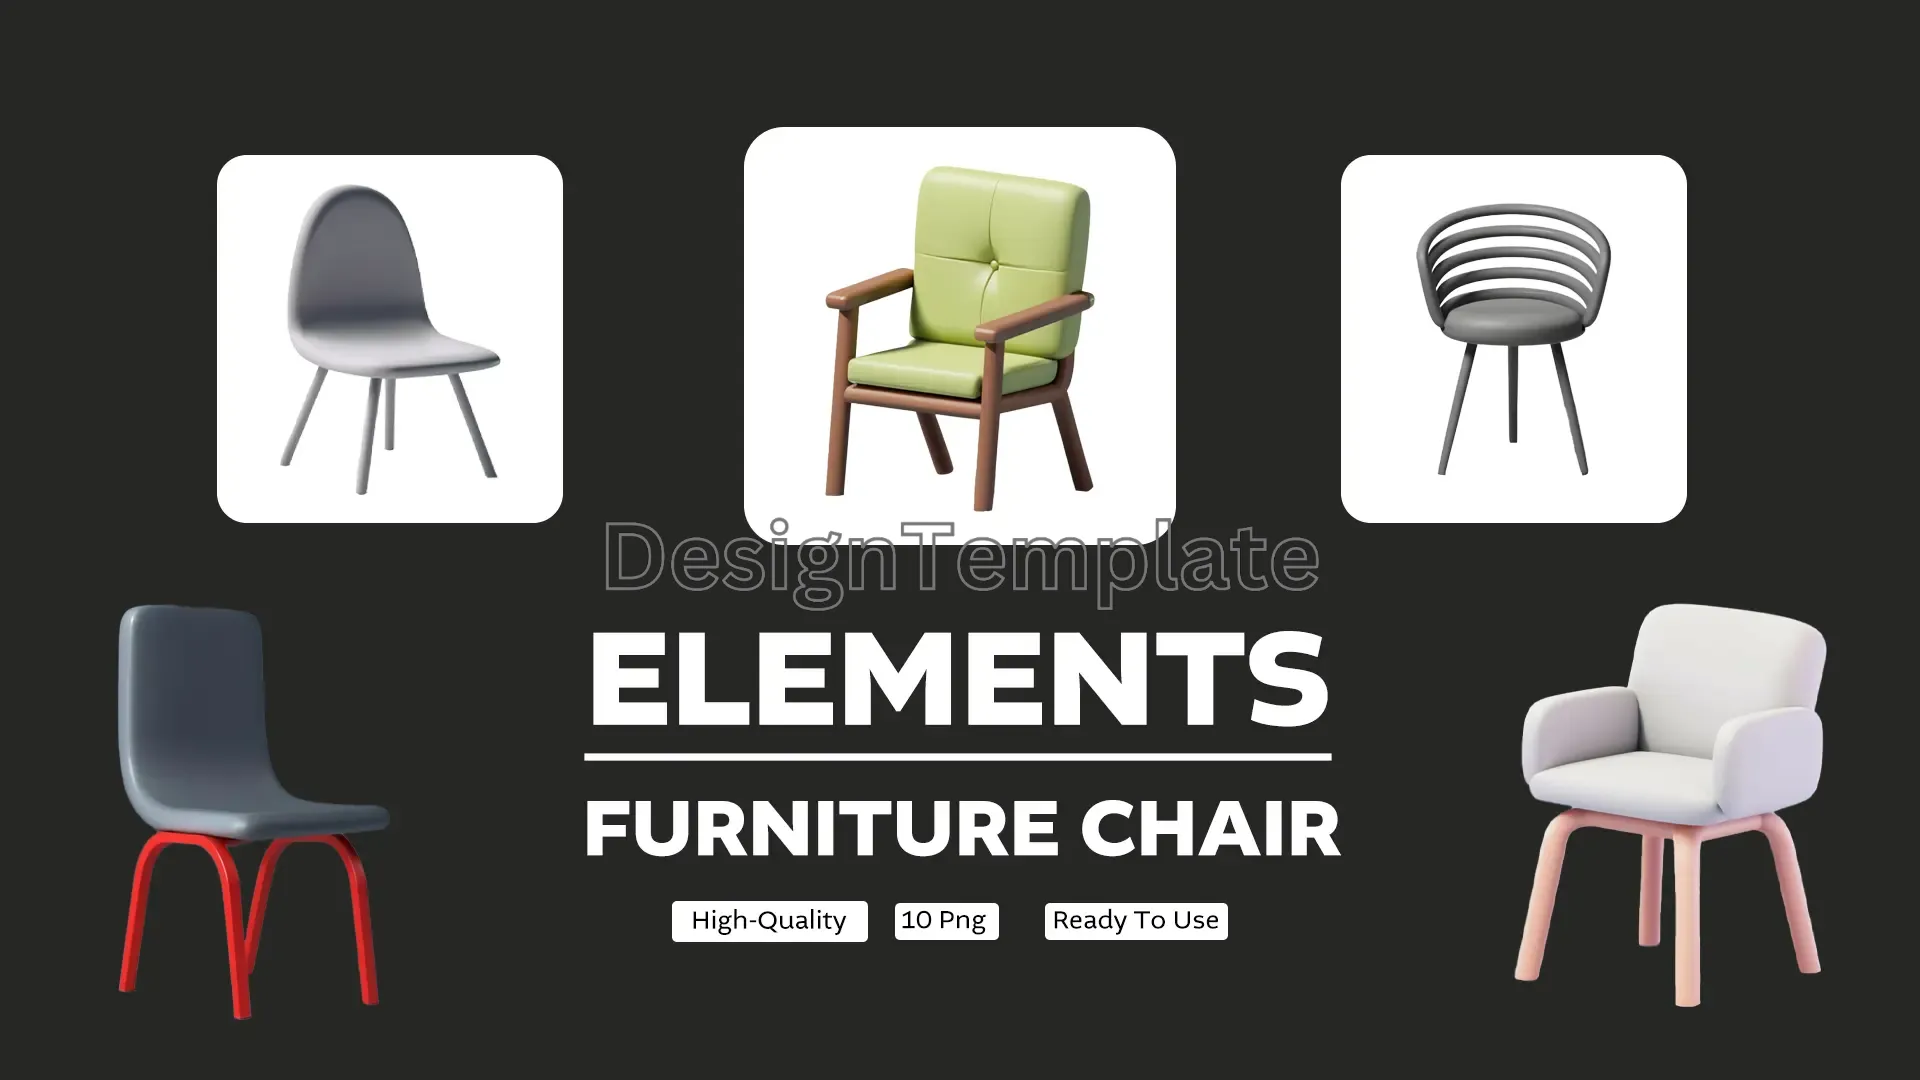 Chair Charms 3D Chair Graphics Pack image